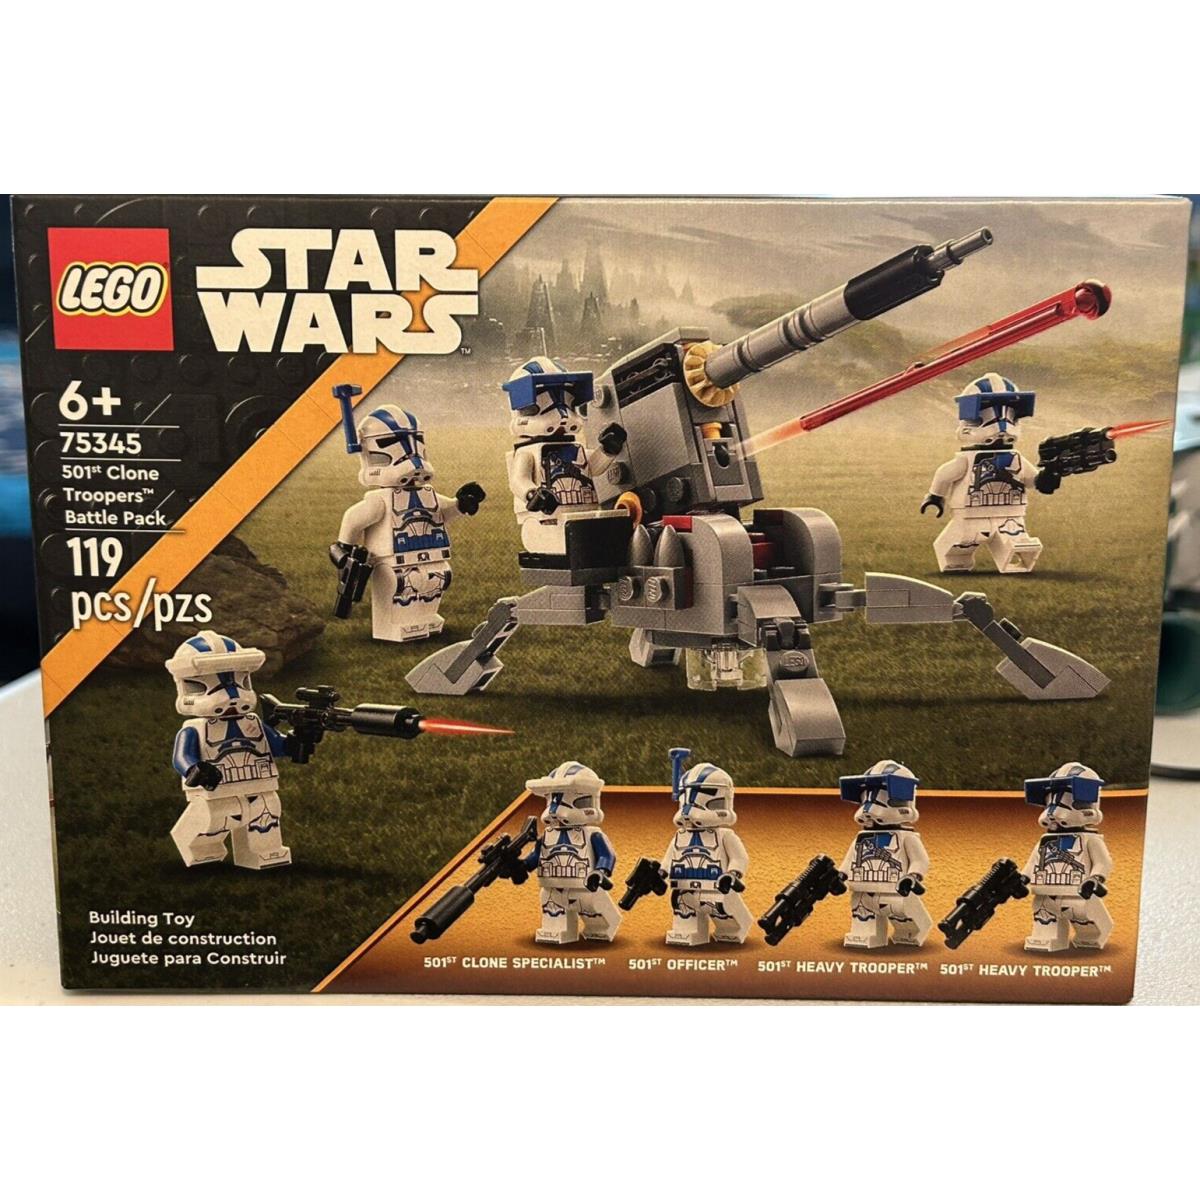 Lego Star Wars 501st Troopers Battle Pack Set 75345 1 Day Shipping